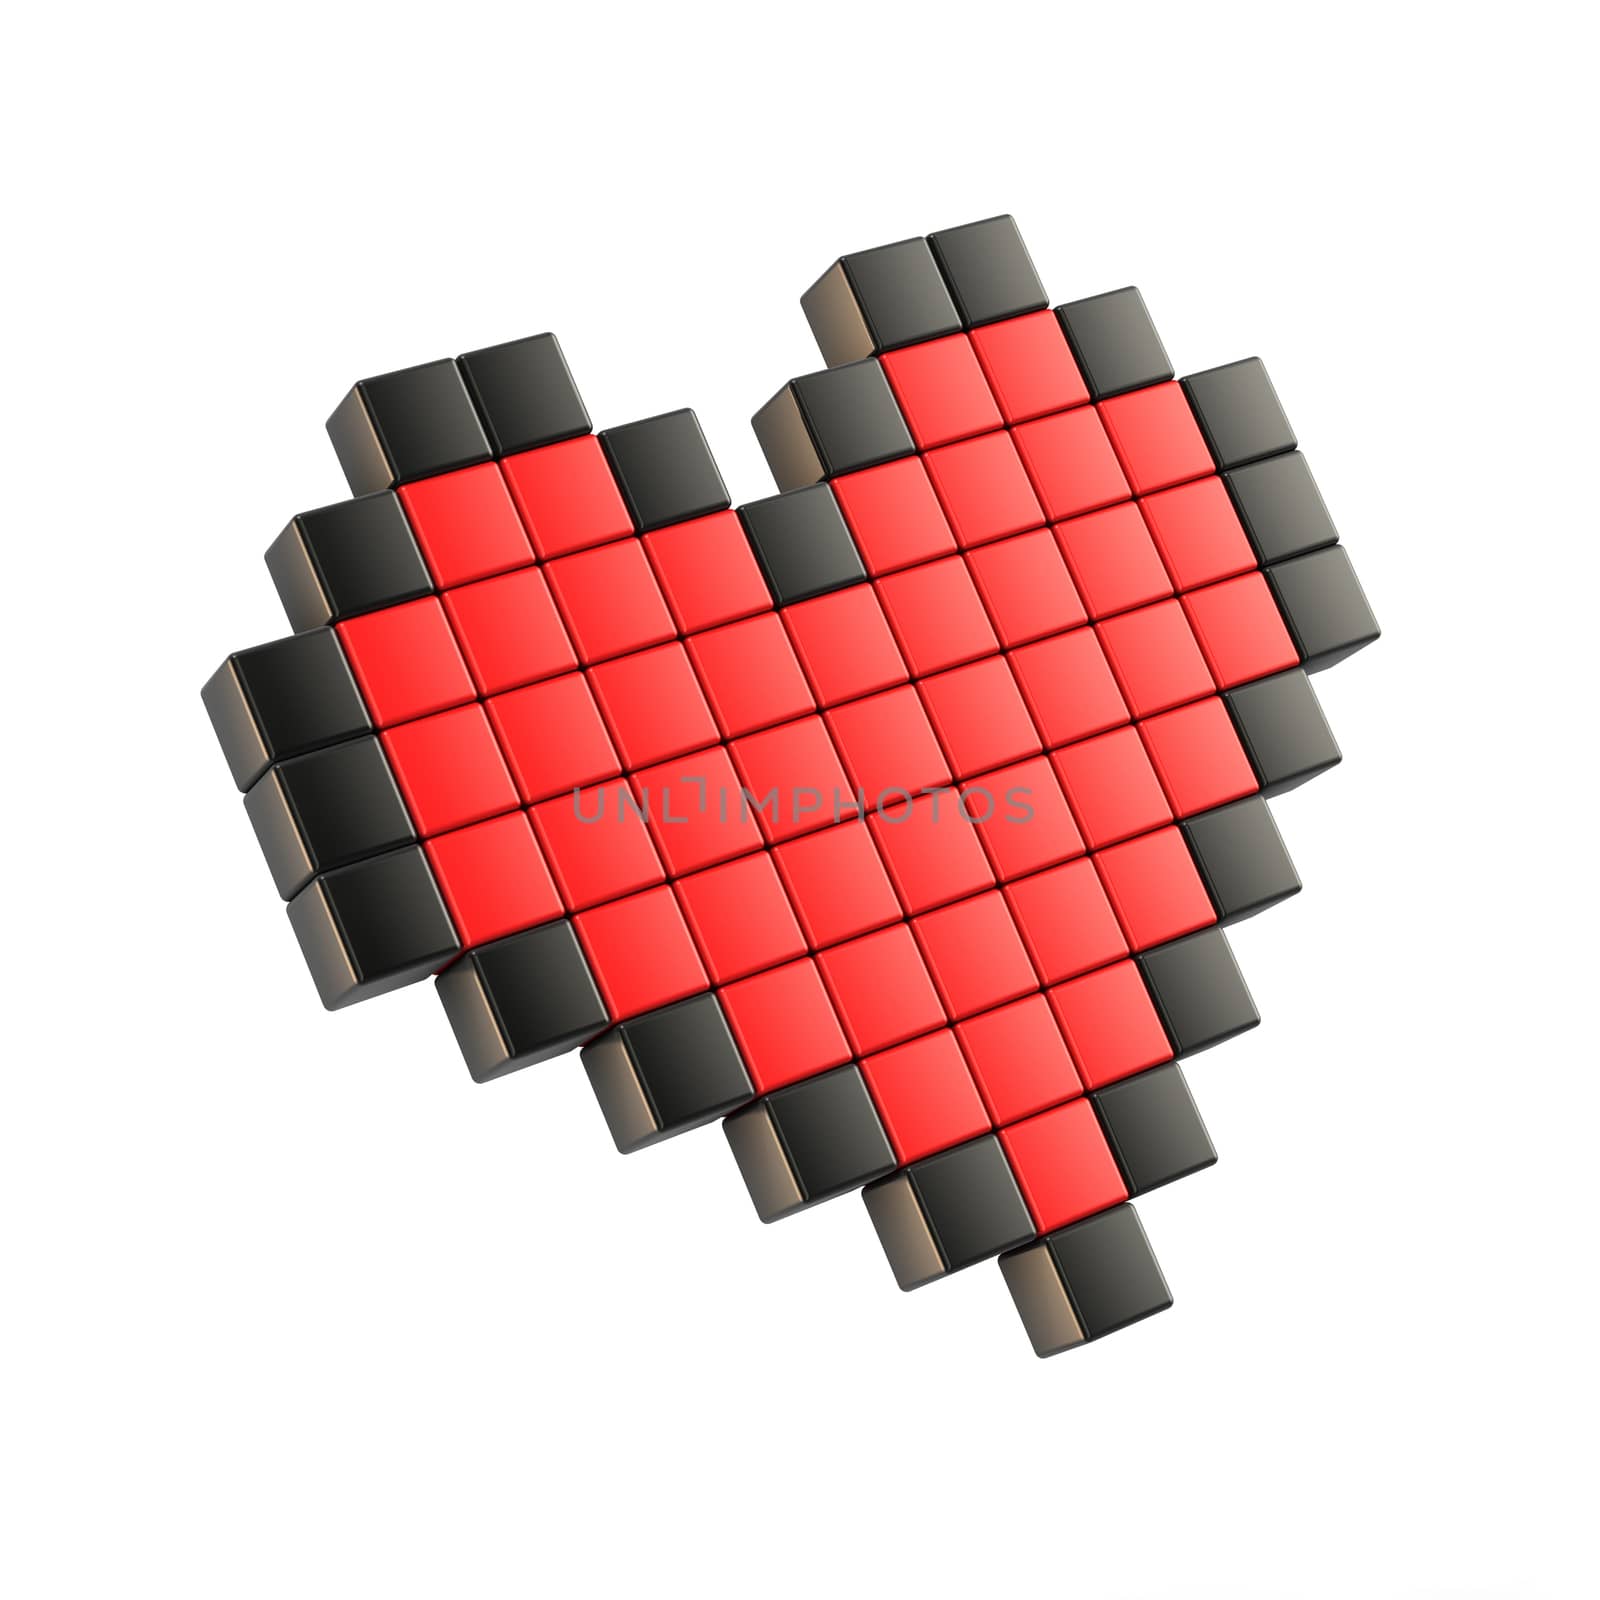 Red pixel heart. 3D render illustration. Isolated on white